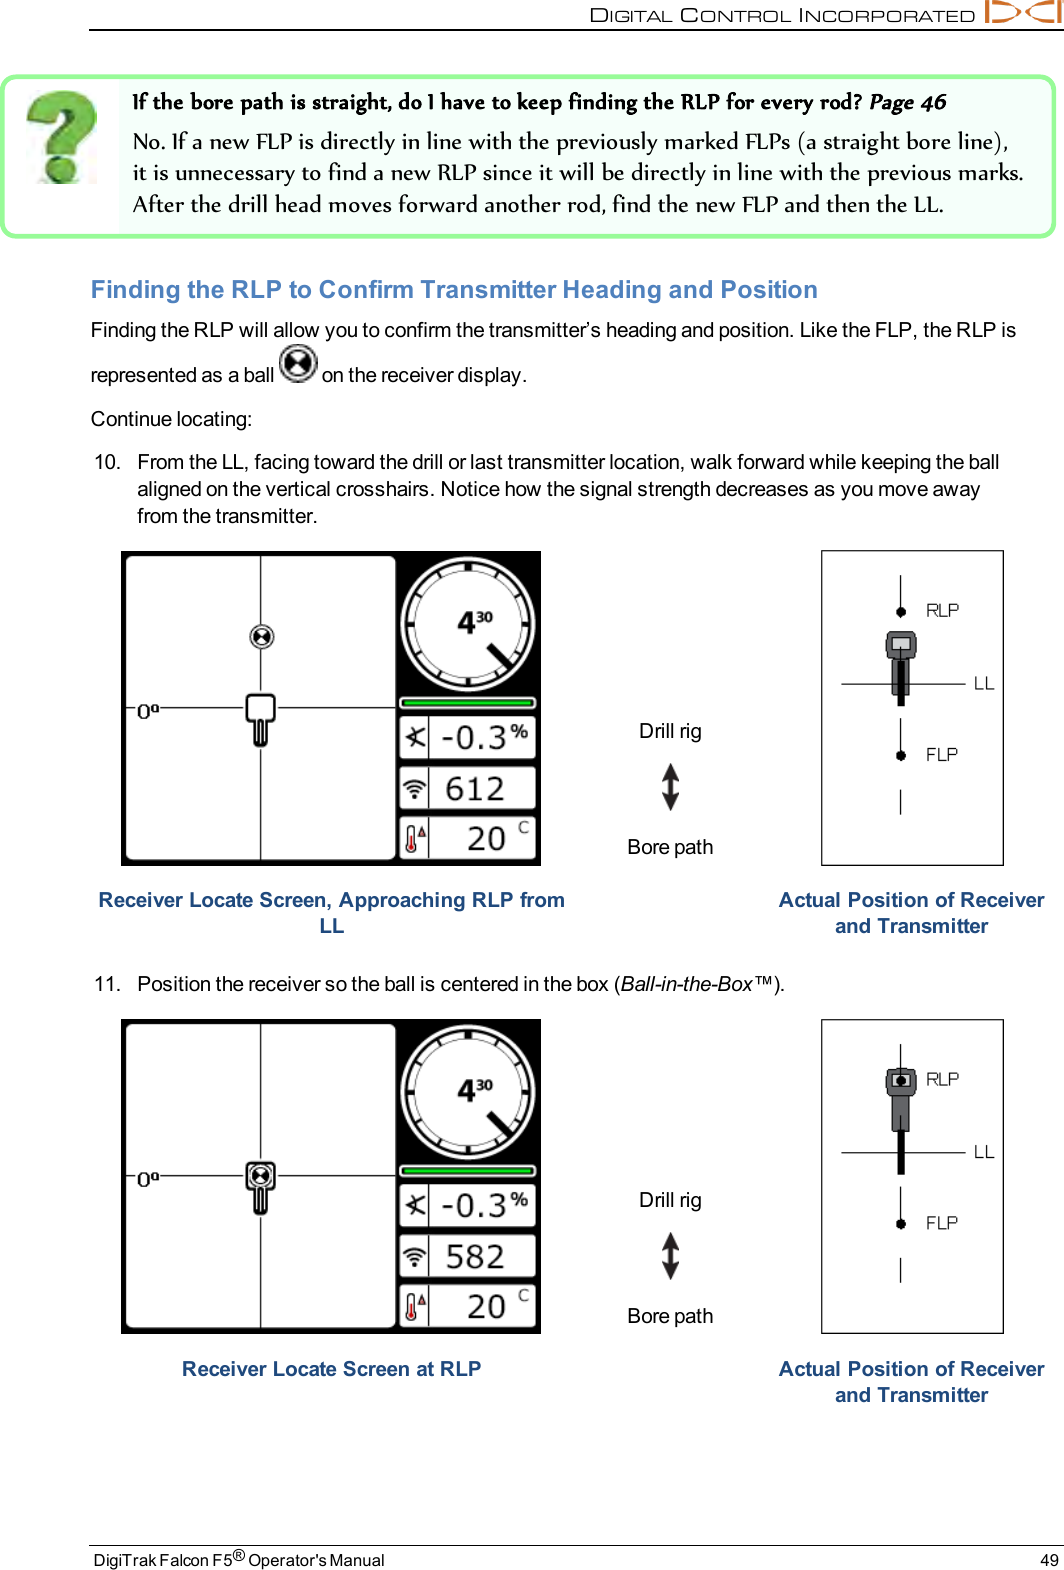 DIGITALCONTROLINCORPORATEDDigiTrak Falcon F5®Operator&apos;s Manual 49If the bore path is straight, do I have to keep finding the RLP for every rod?Page 46No. If a new FLP is directly in line with the previously marked FLPs (a straight bore line),it is unnecessary to find a new RLP since it will be directly in line with the previous marks.After the drill head moves forward another rod, find the new FLP and then the LL.Finding the RLP to Confirm Transmitter Heading and PositionFinding the RLP will allow you to confirm the transmitter’s heading and position. Like the FLP, the RLP isrepresented as a ball on the receiver display.Continue locating:10. From the LL, facing toward the drill or last transmitter location, walk forward while keeping the ballaligned on the vertical crosshairs. Notice how the signal strength decreases as you move awayfrom the transmitter.Drill rigBore pathReceiver Locate Screen, Approaching RLP fromLLActual Position of Receiverand Transmitter11. Position the receiver so the ball is centered in the box (Ball-in-the-Box™).Drill rigBore pathReceiver Locate Screen at RLP Actual Position of Receiverand Transmitter